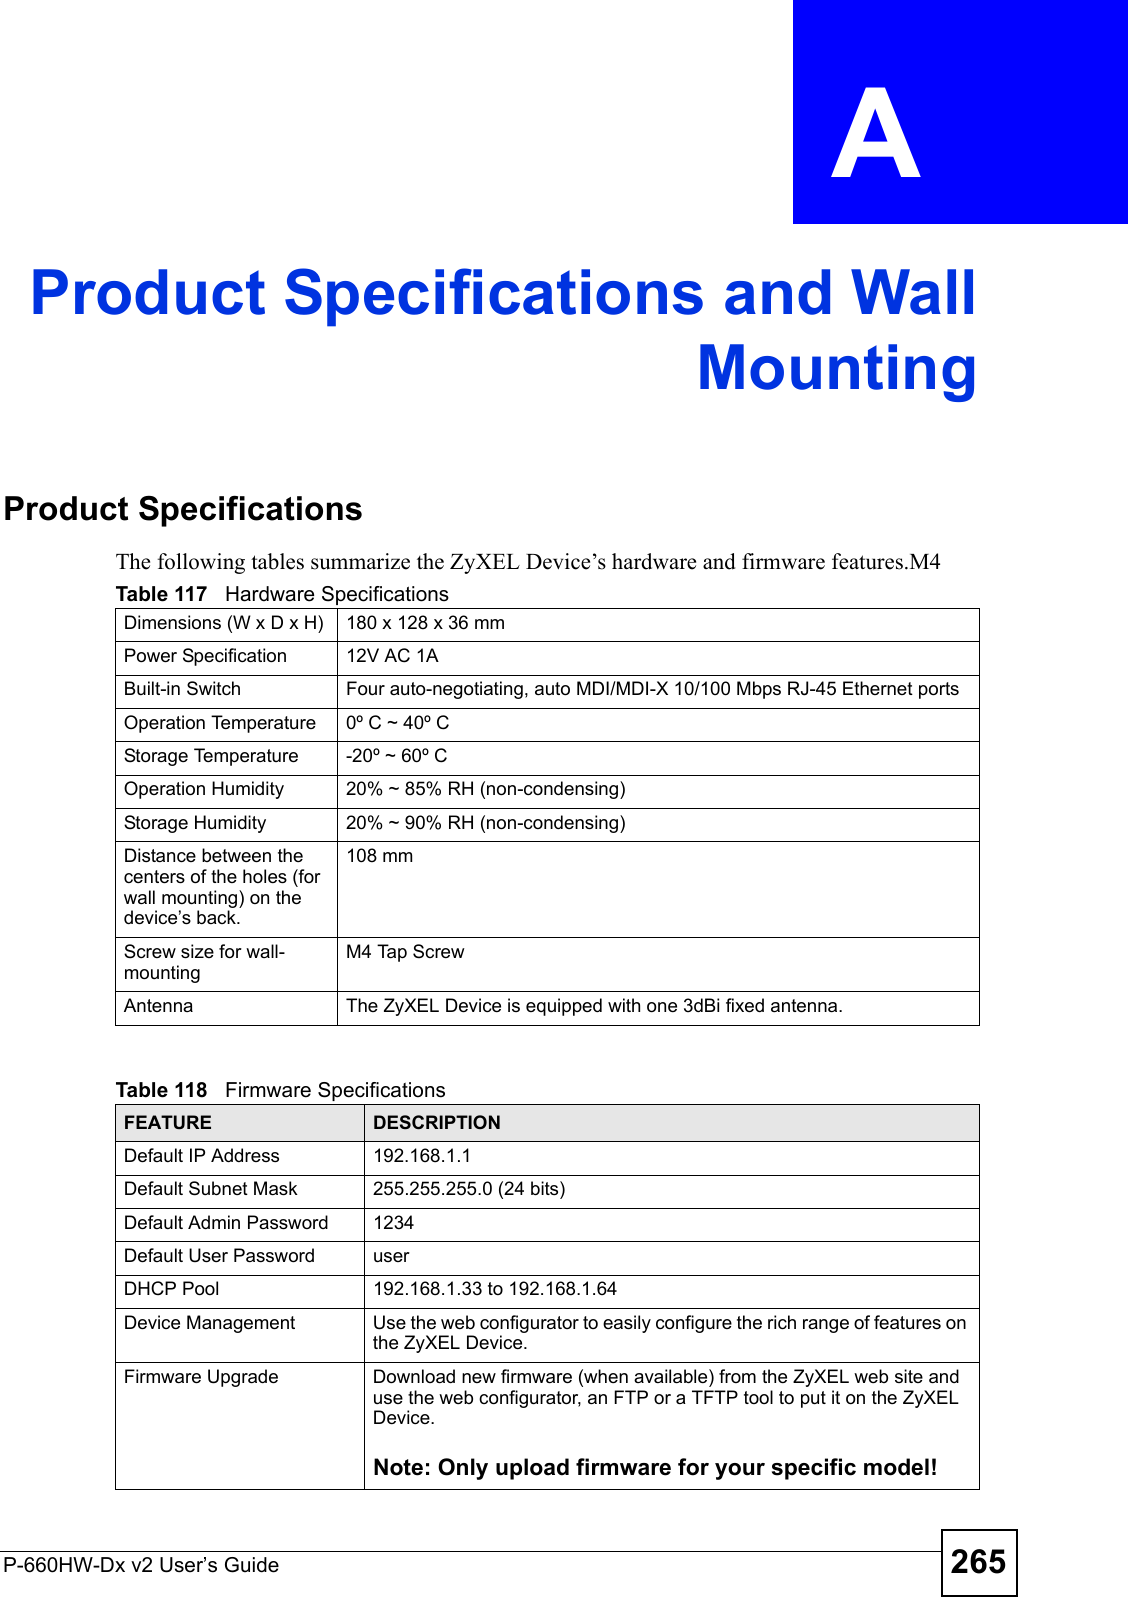 P-660HW-Dx v2 User’s Guide 265APPENDIX  A Product Specifications and WallMountingProduct SpecificationsThe following tables summarize the ZyXEL Device’s hardware and firmware features.M4 Table 117   Hardware SpecificationsDimensions (W x D x H)  180 x 128 x 36 mmPower Specification 12V AC 1ABuilt-in Switch Four auto-negotiating, auto MDI/MDI-X 10/100 Mbps RJ-45 Ethernet portsOperation Temperature 0º C ~ 40º CStorage Temperature -20º ~ 60º COperation Humidity 20% ~ 85% RH (non-condensing)Storage Humidity 20% ~ 90% RH (non-condensing)Distance between the centers of the holes (for wall mounting) on the device’s back.108 mmScrew size for wall-mountingM4 Tap ScrewAntenna The ZyXEL Device is equipped with one 3dBi fixed antenna.Table 118   Firmware Specifications FEATURE DESCRIPTIONDefault IP Address 192.168.1.1Default Subnet Mask 255.255.255.0 (24 bits)Default Admin Password 1234Default User Password userDHCP Pool 192.168.1.33 to 192.168.1.64 Device Management Use the web configurator to easily configure the rich range of features on the ZyXEL Device.Firmware Upgrade Download new firmware (when available) from the ZyXEL web site and use the web configurator, an FTP or a TFTP tool to put it on the ZyXEL Device.Note: Only upload firmware for your specific model!